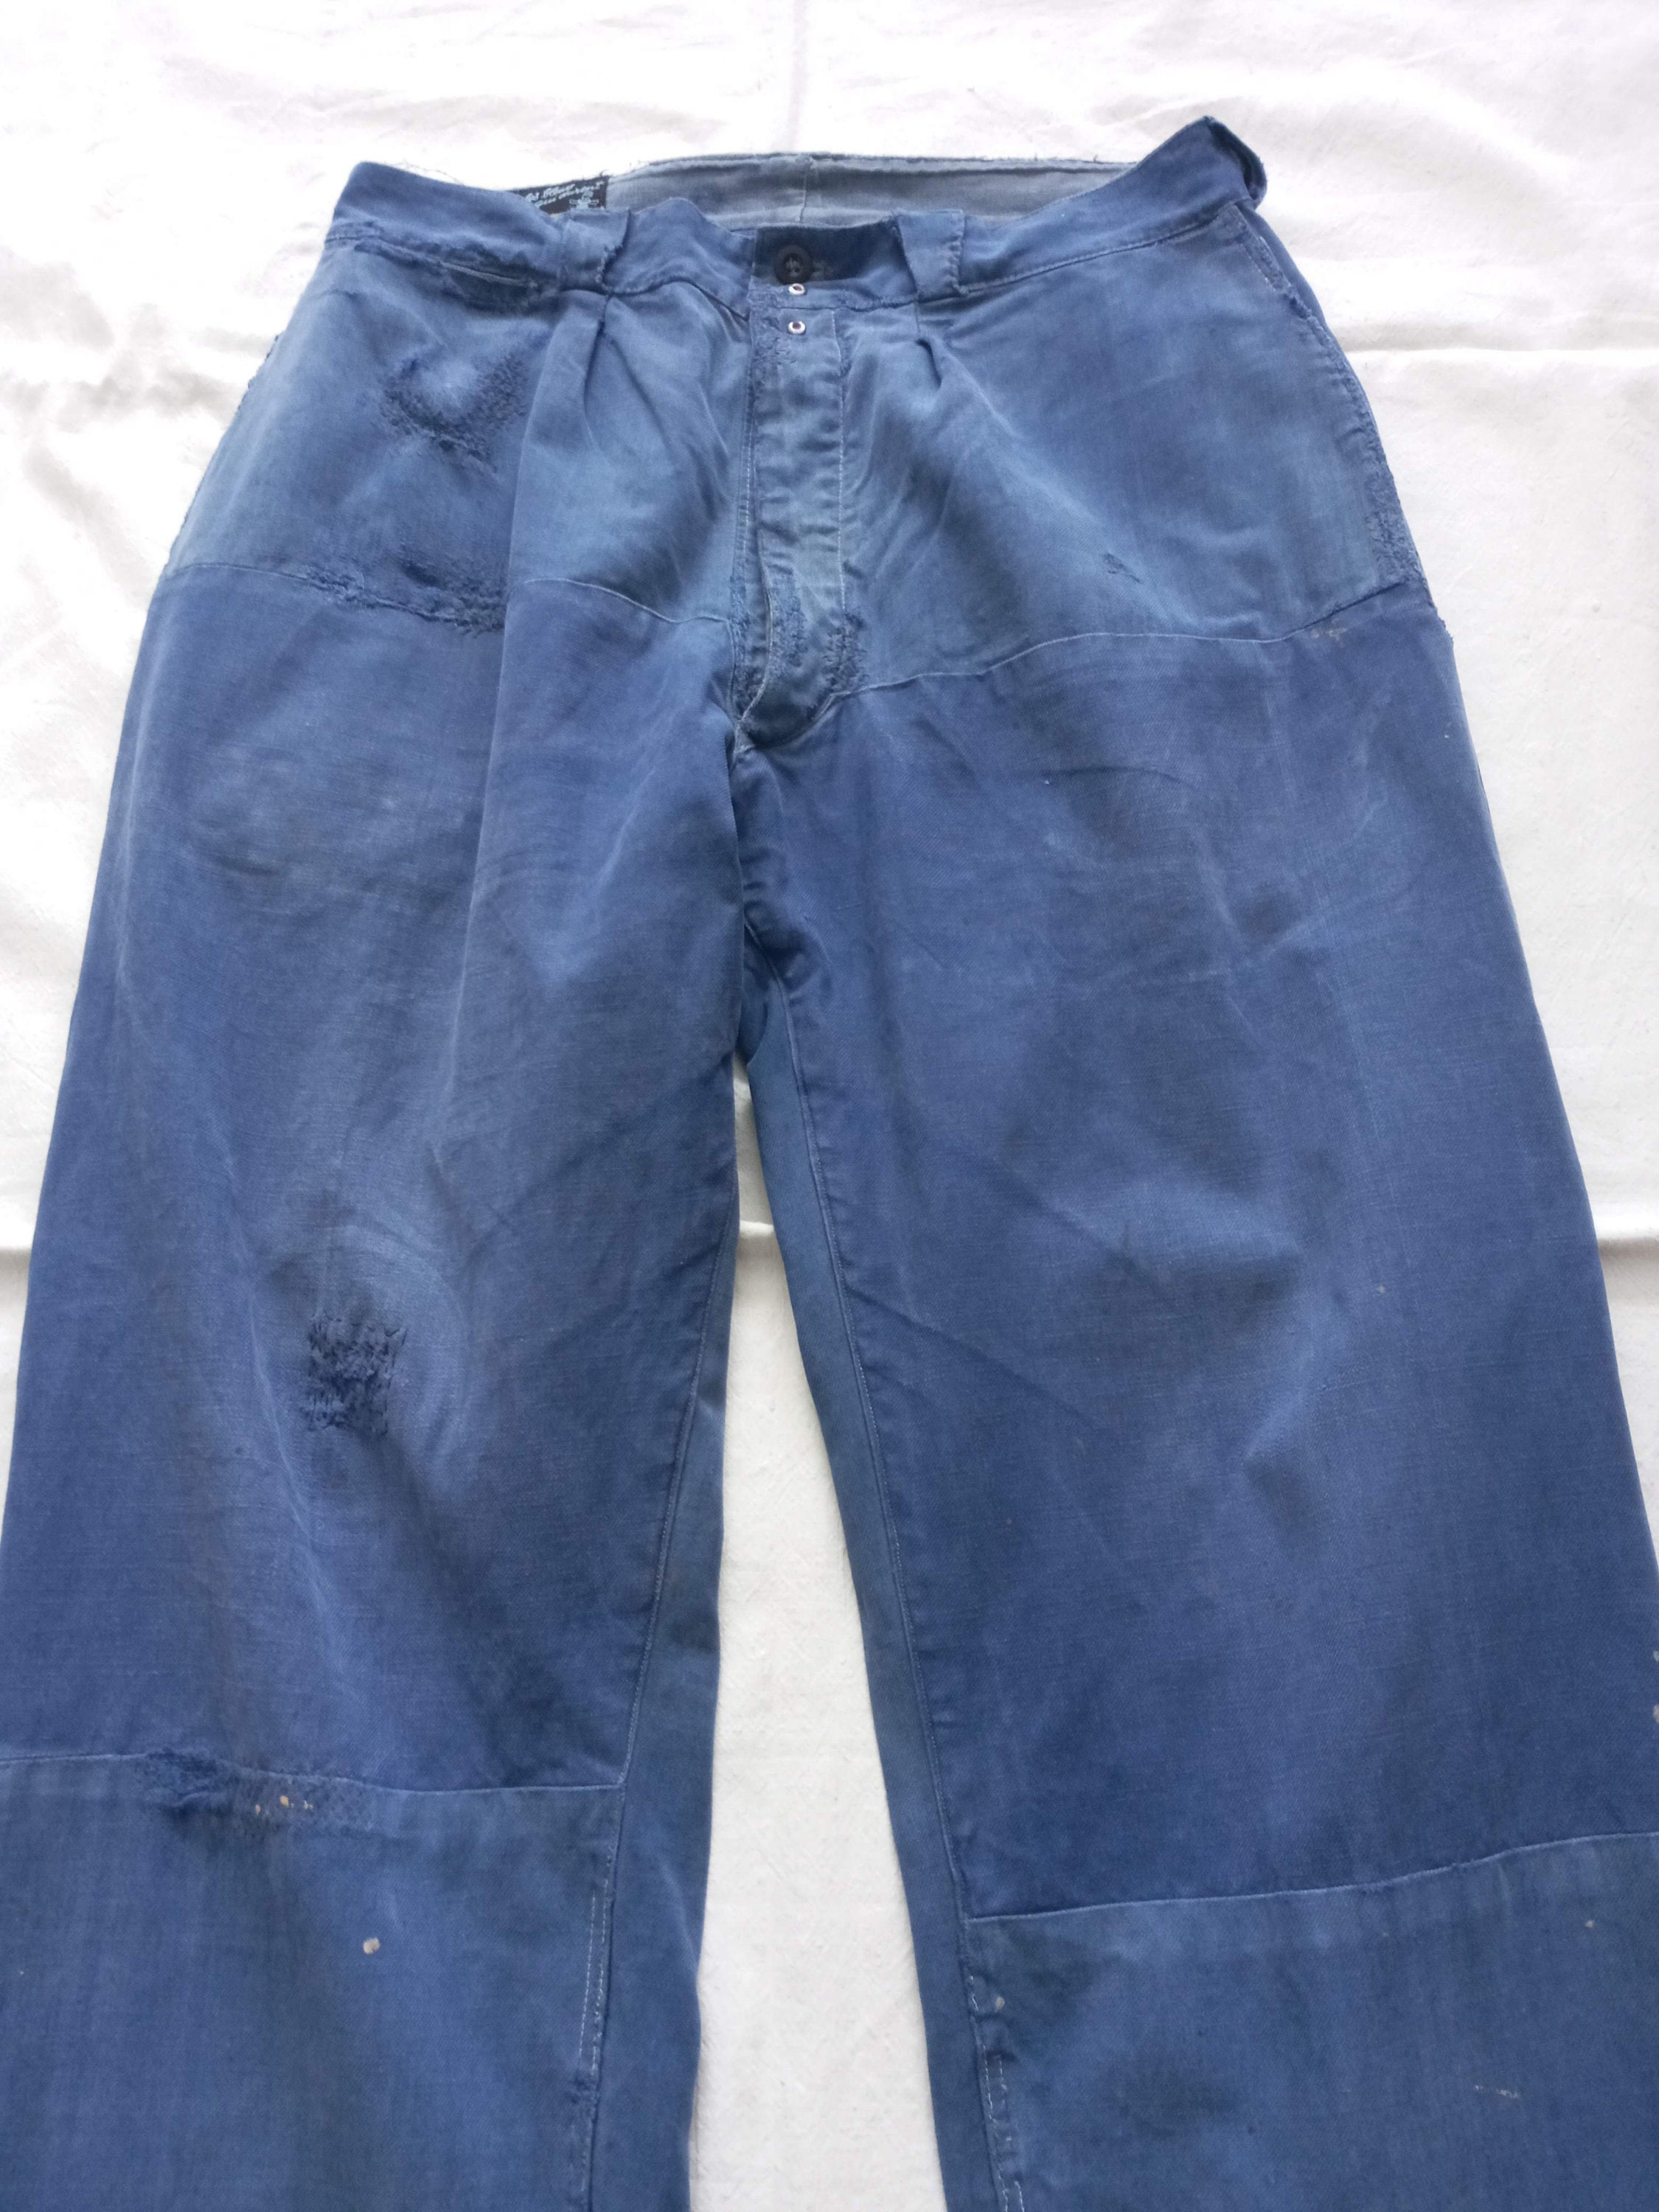 Vintage 1950s 50s French Chore Pants Solida Workwear Blue Cotton Patched  Darned Indigo Worker Trousers 34.5W 29L -  Israel